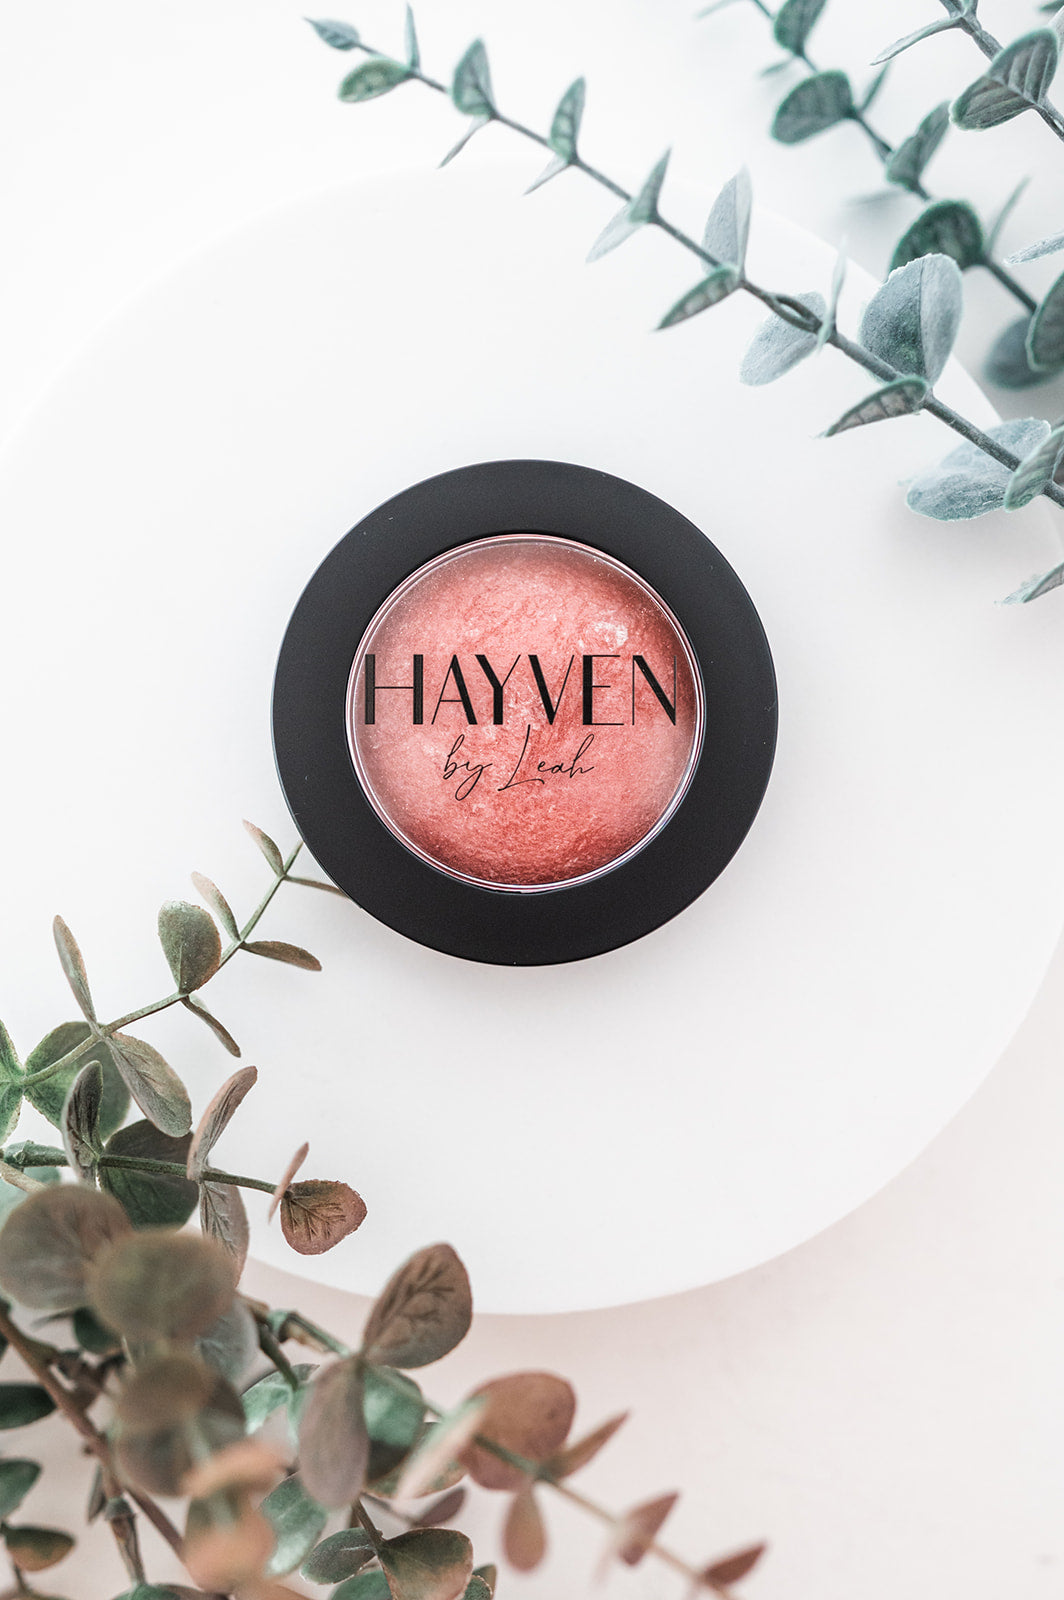 Baked Mineral Blush